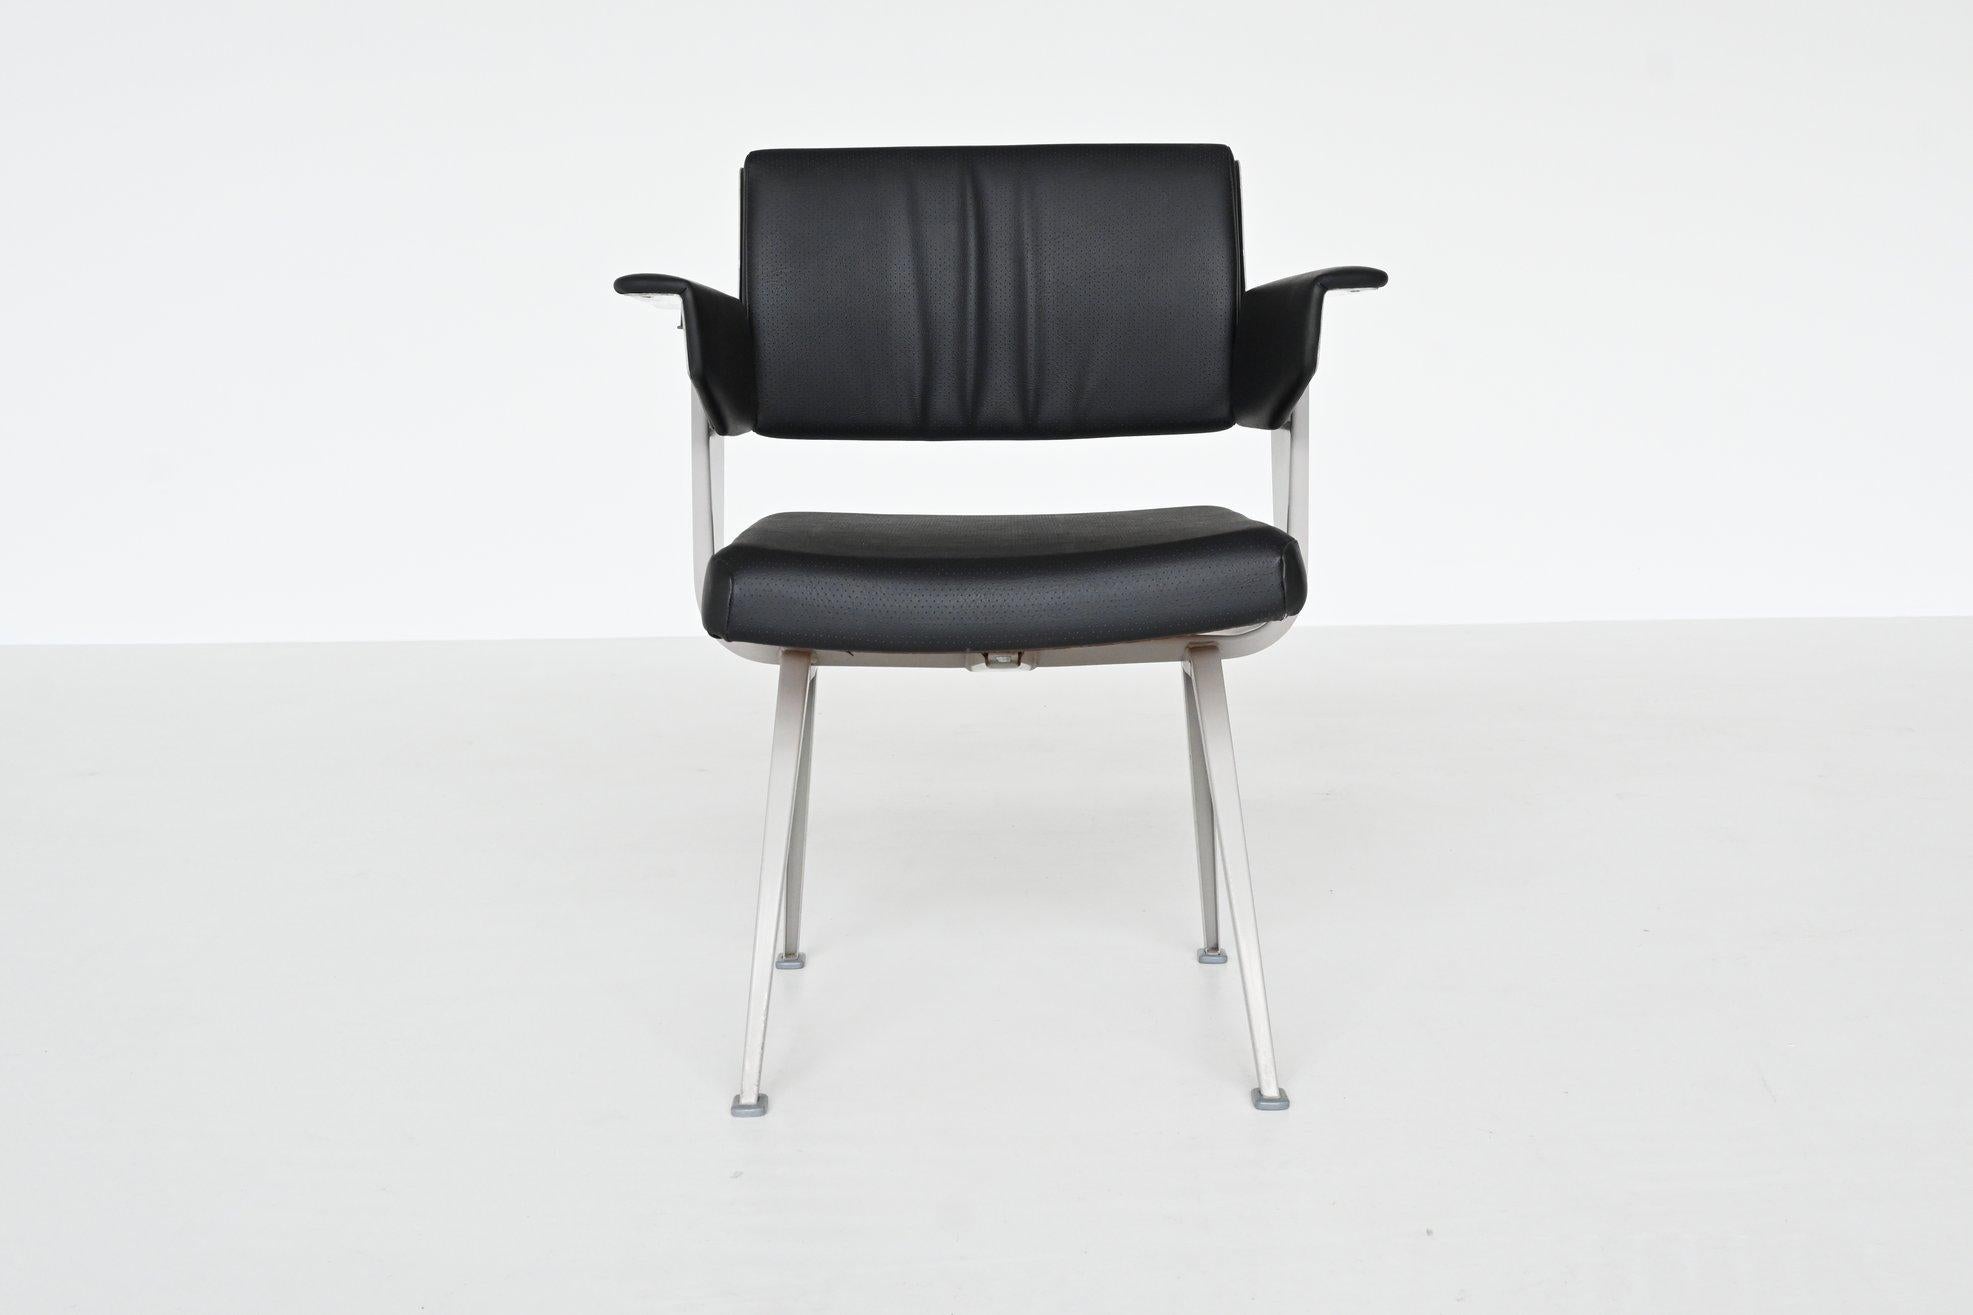 Industrial Resort armchair designed by Friso Kramer, manufactured by Ahrend de Cirkel, The Netherlands 1960. The chair has a grey lacquered metal frame with V structure legs. The seat, back and arms are upholstered in black faux leather and are in